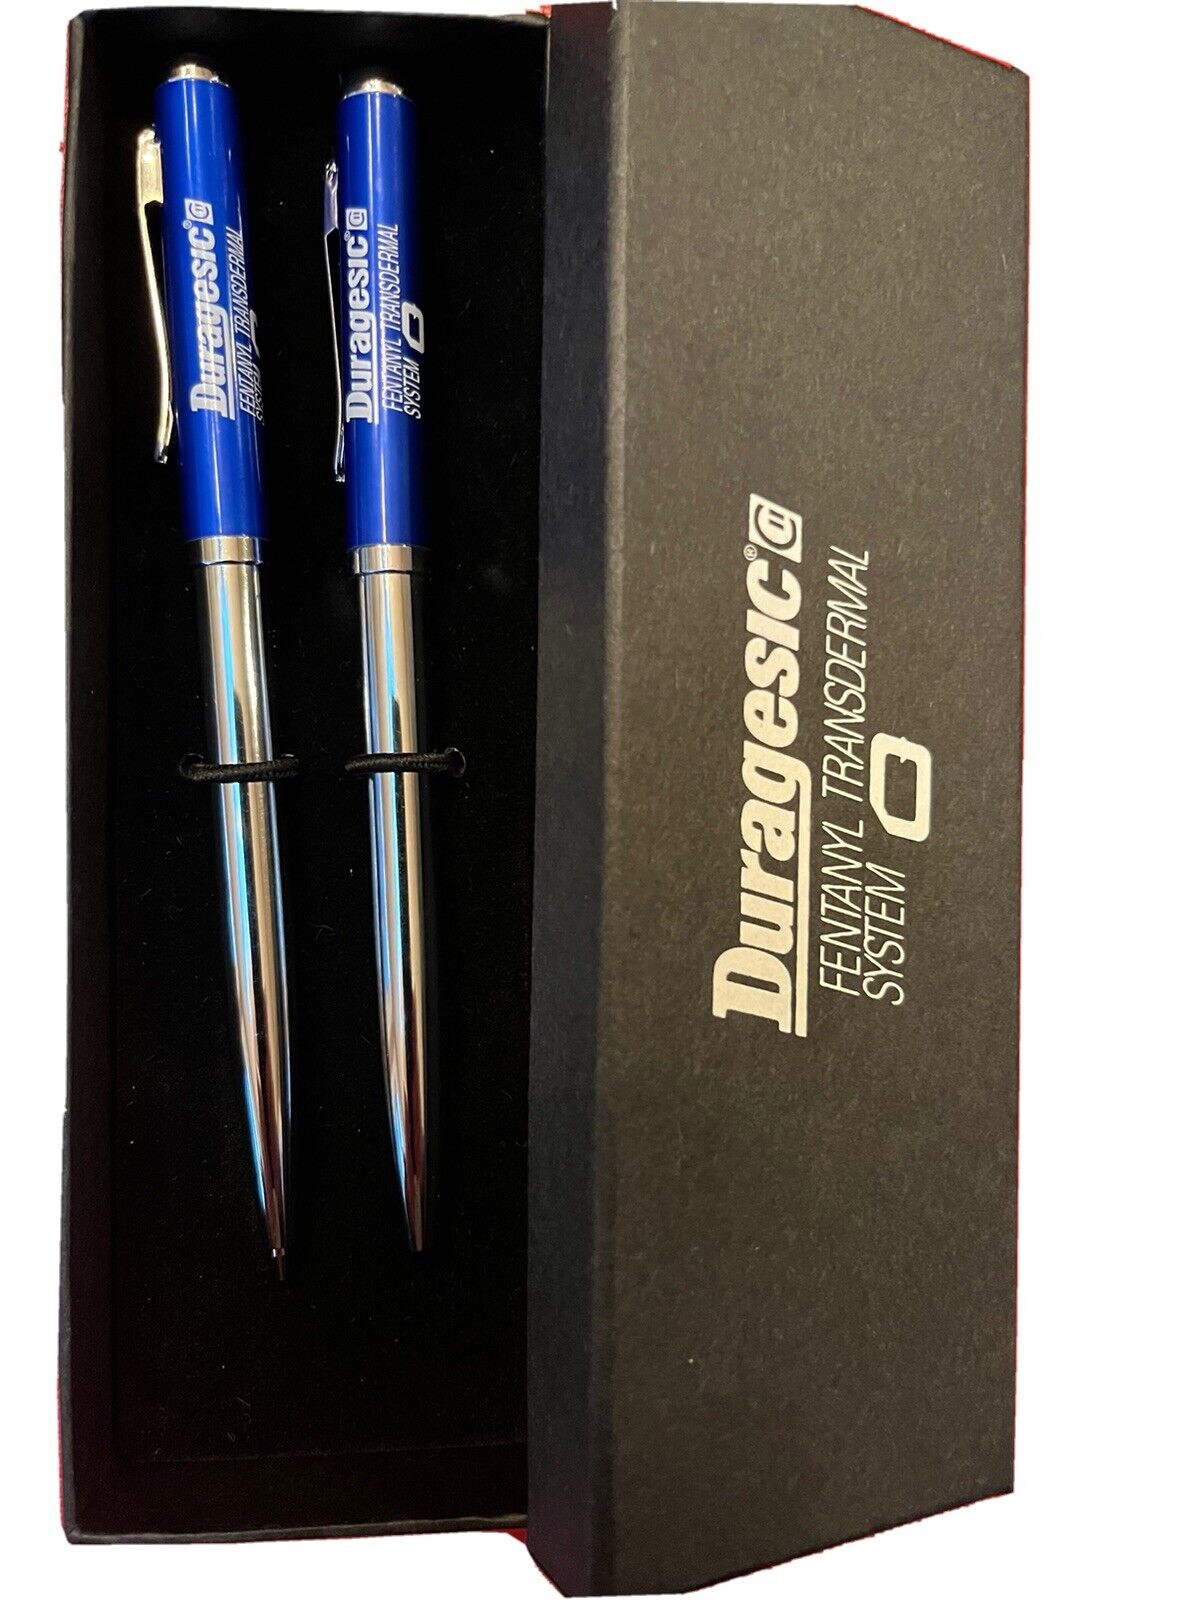 Duragesic (FENTANYL) Drug Rep Pen and Mechanical Pencil Set Class 2 Narcotic 